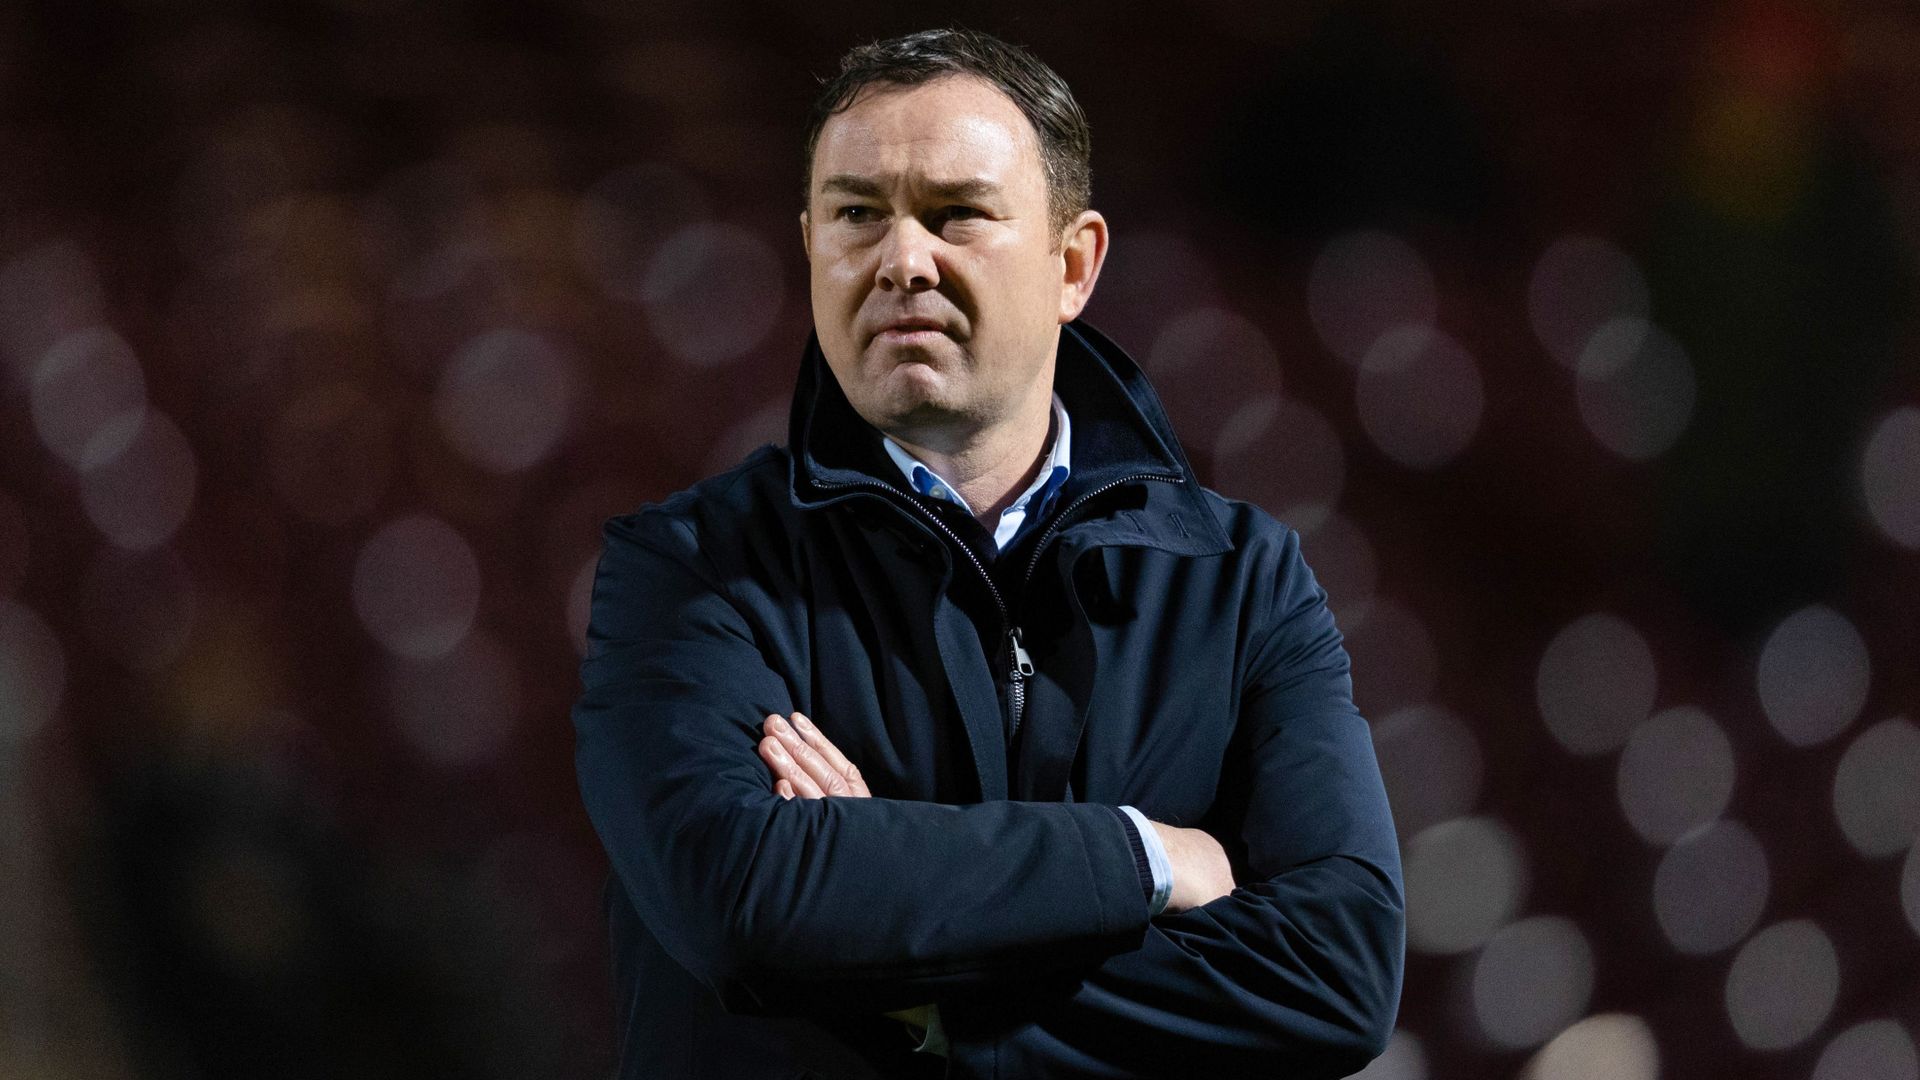 Adams resigns as Ross County manager after 12 games in charge